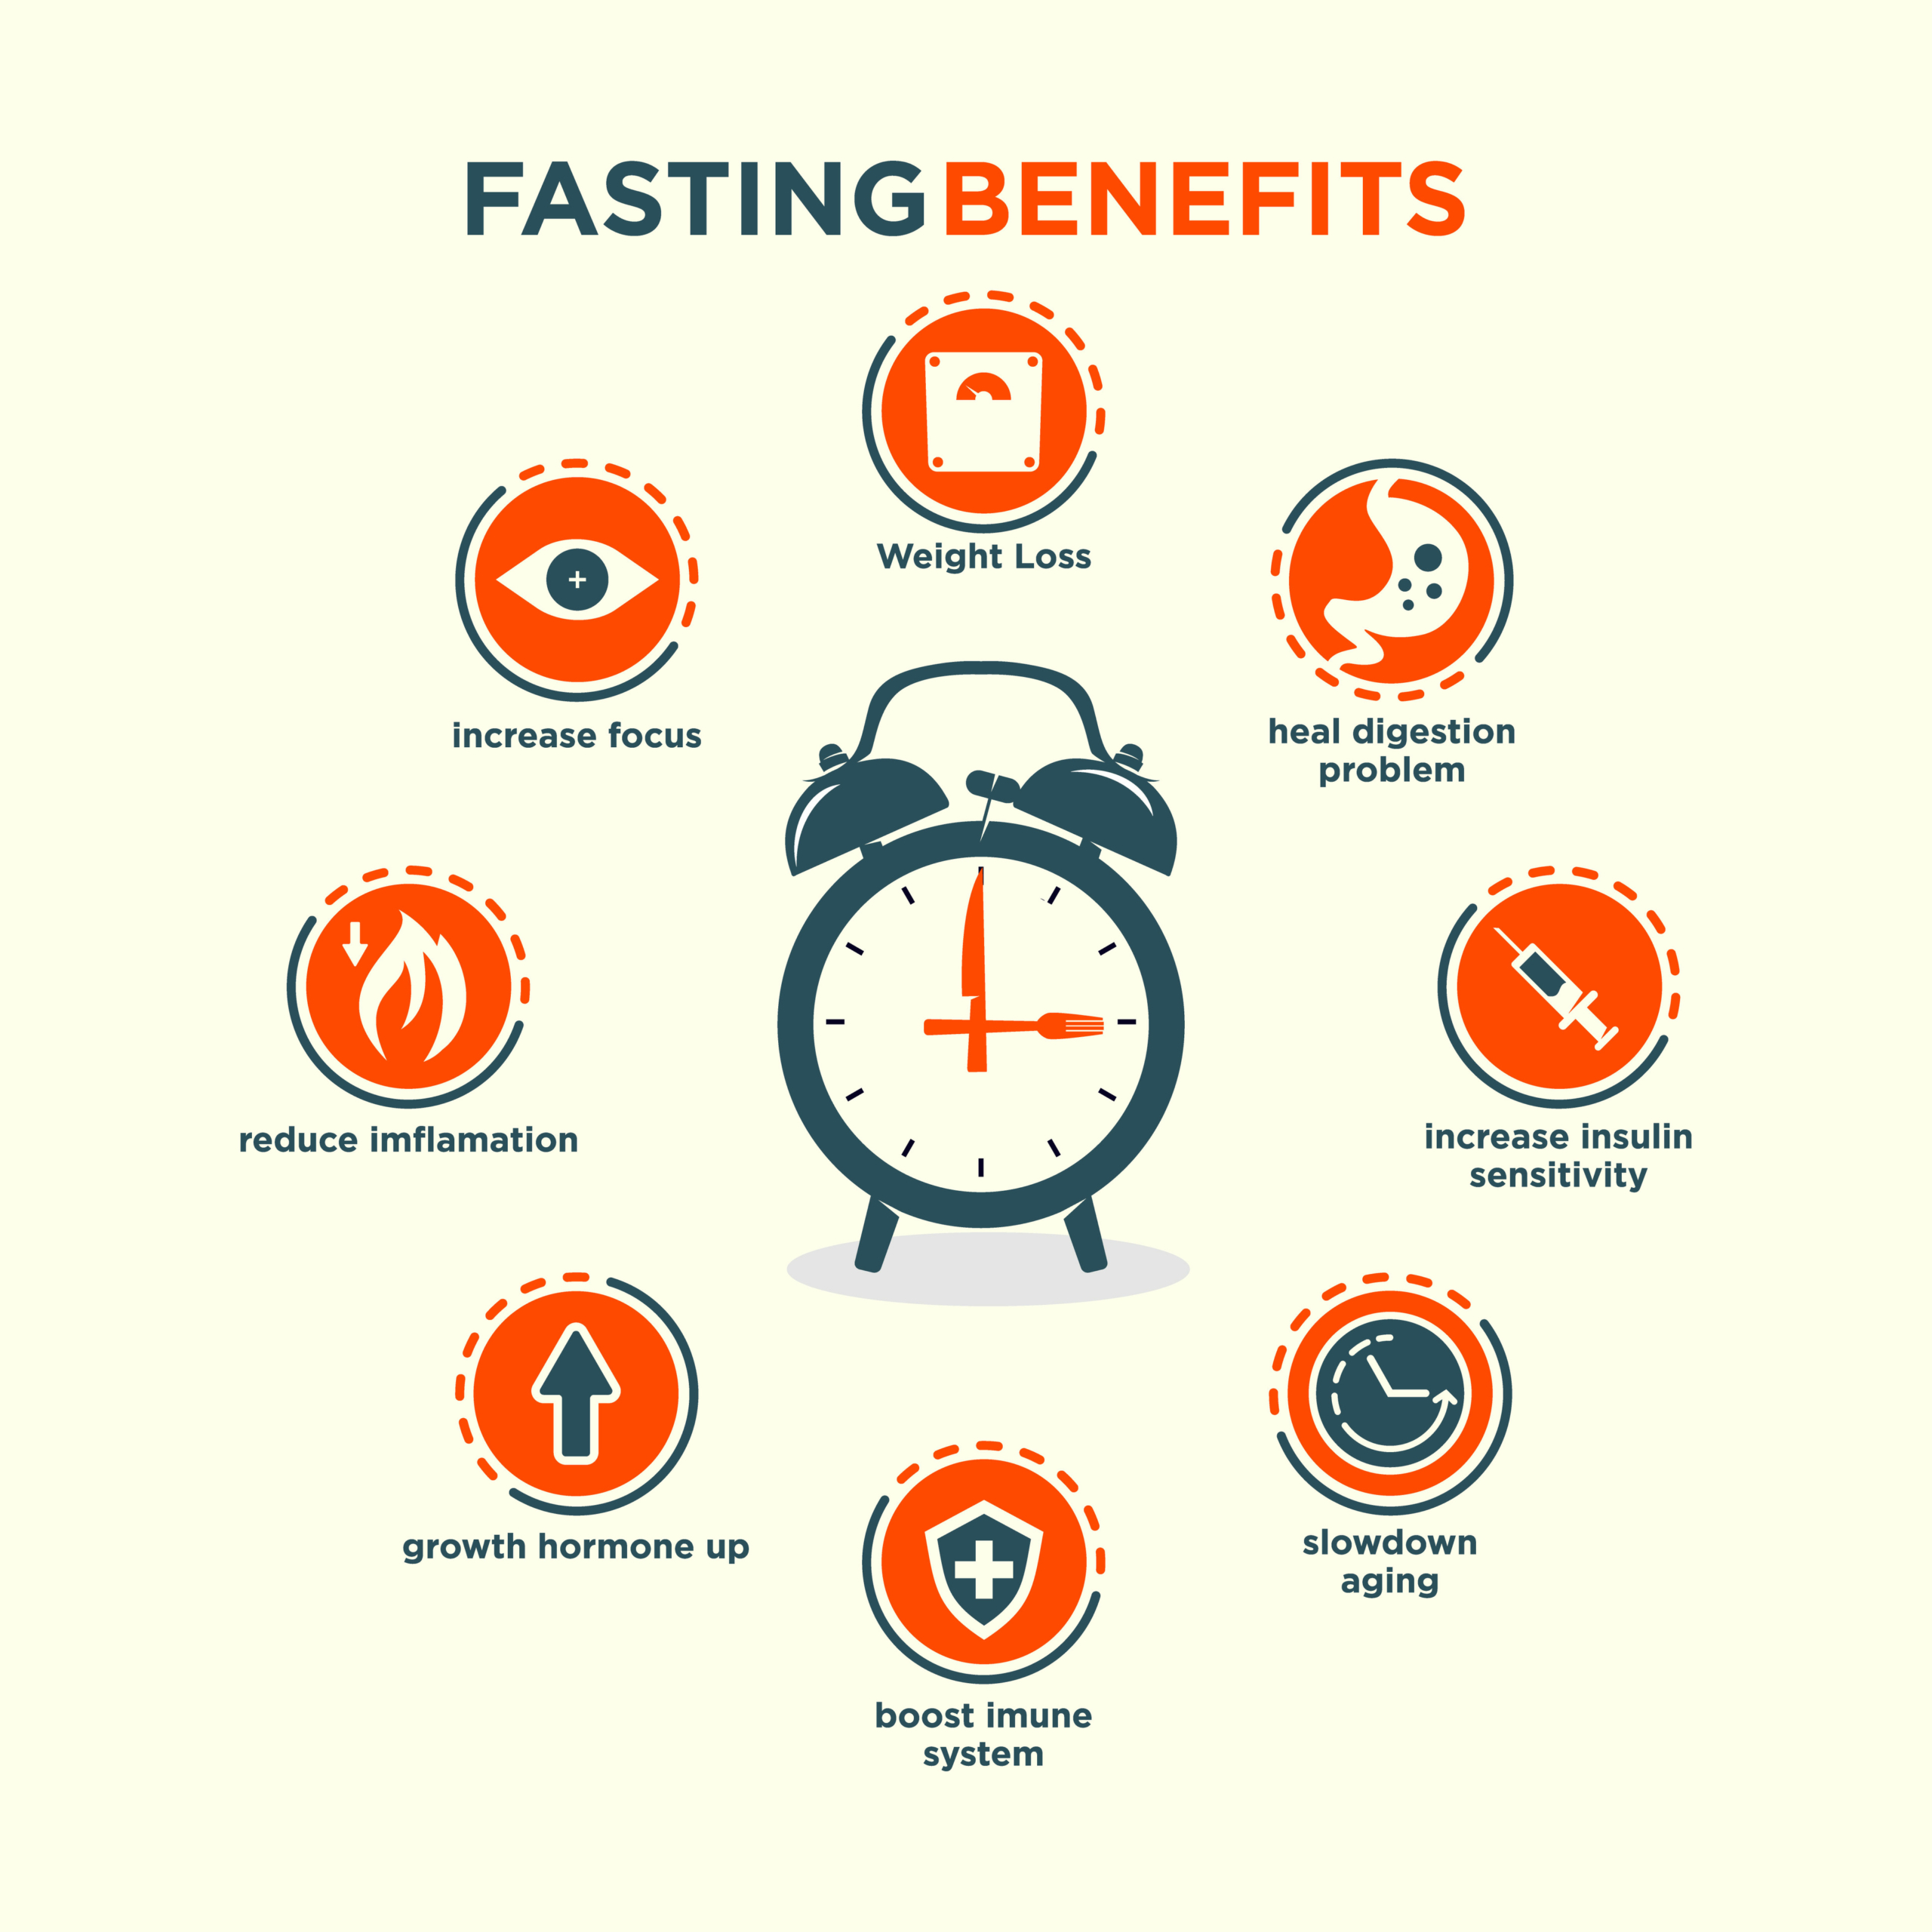 8 Amazing Health Benefits of Fasting Once a Week - The Pilot Works